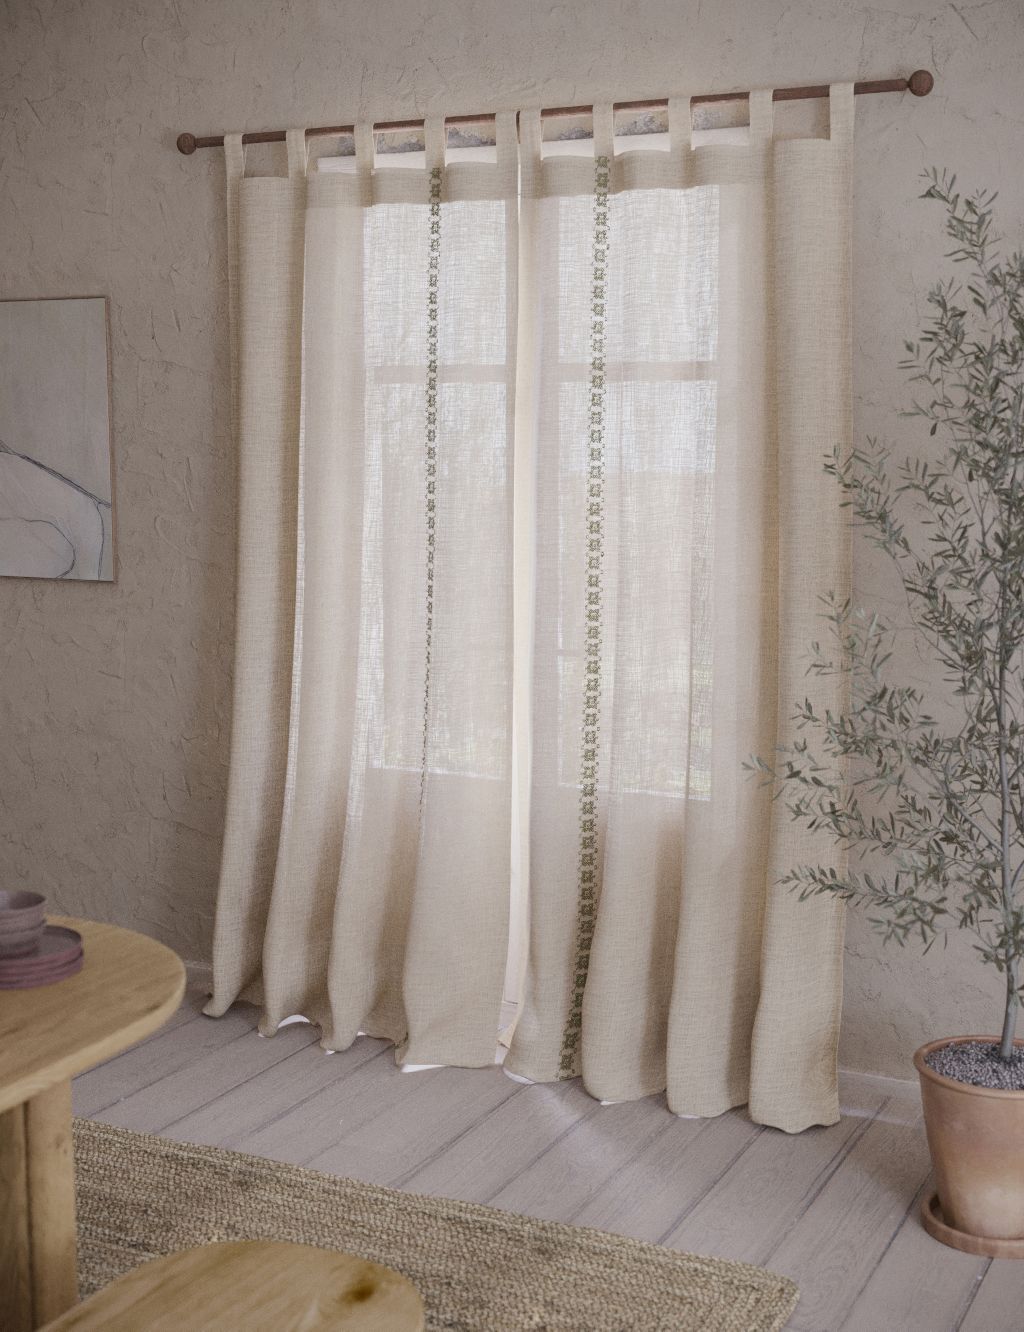 Acapulco Sheer Embroidered Tab Top Curtains image 3